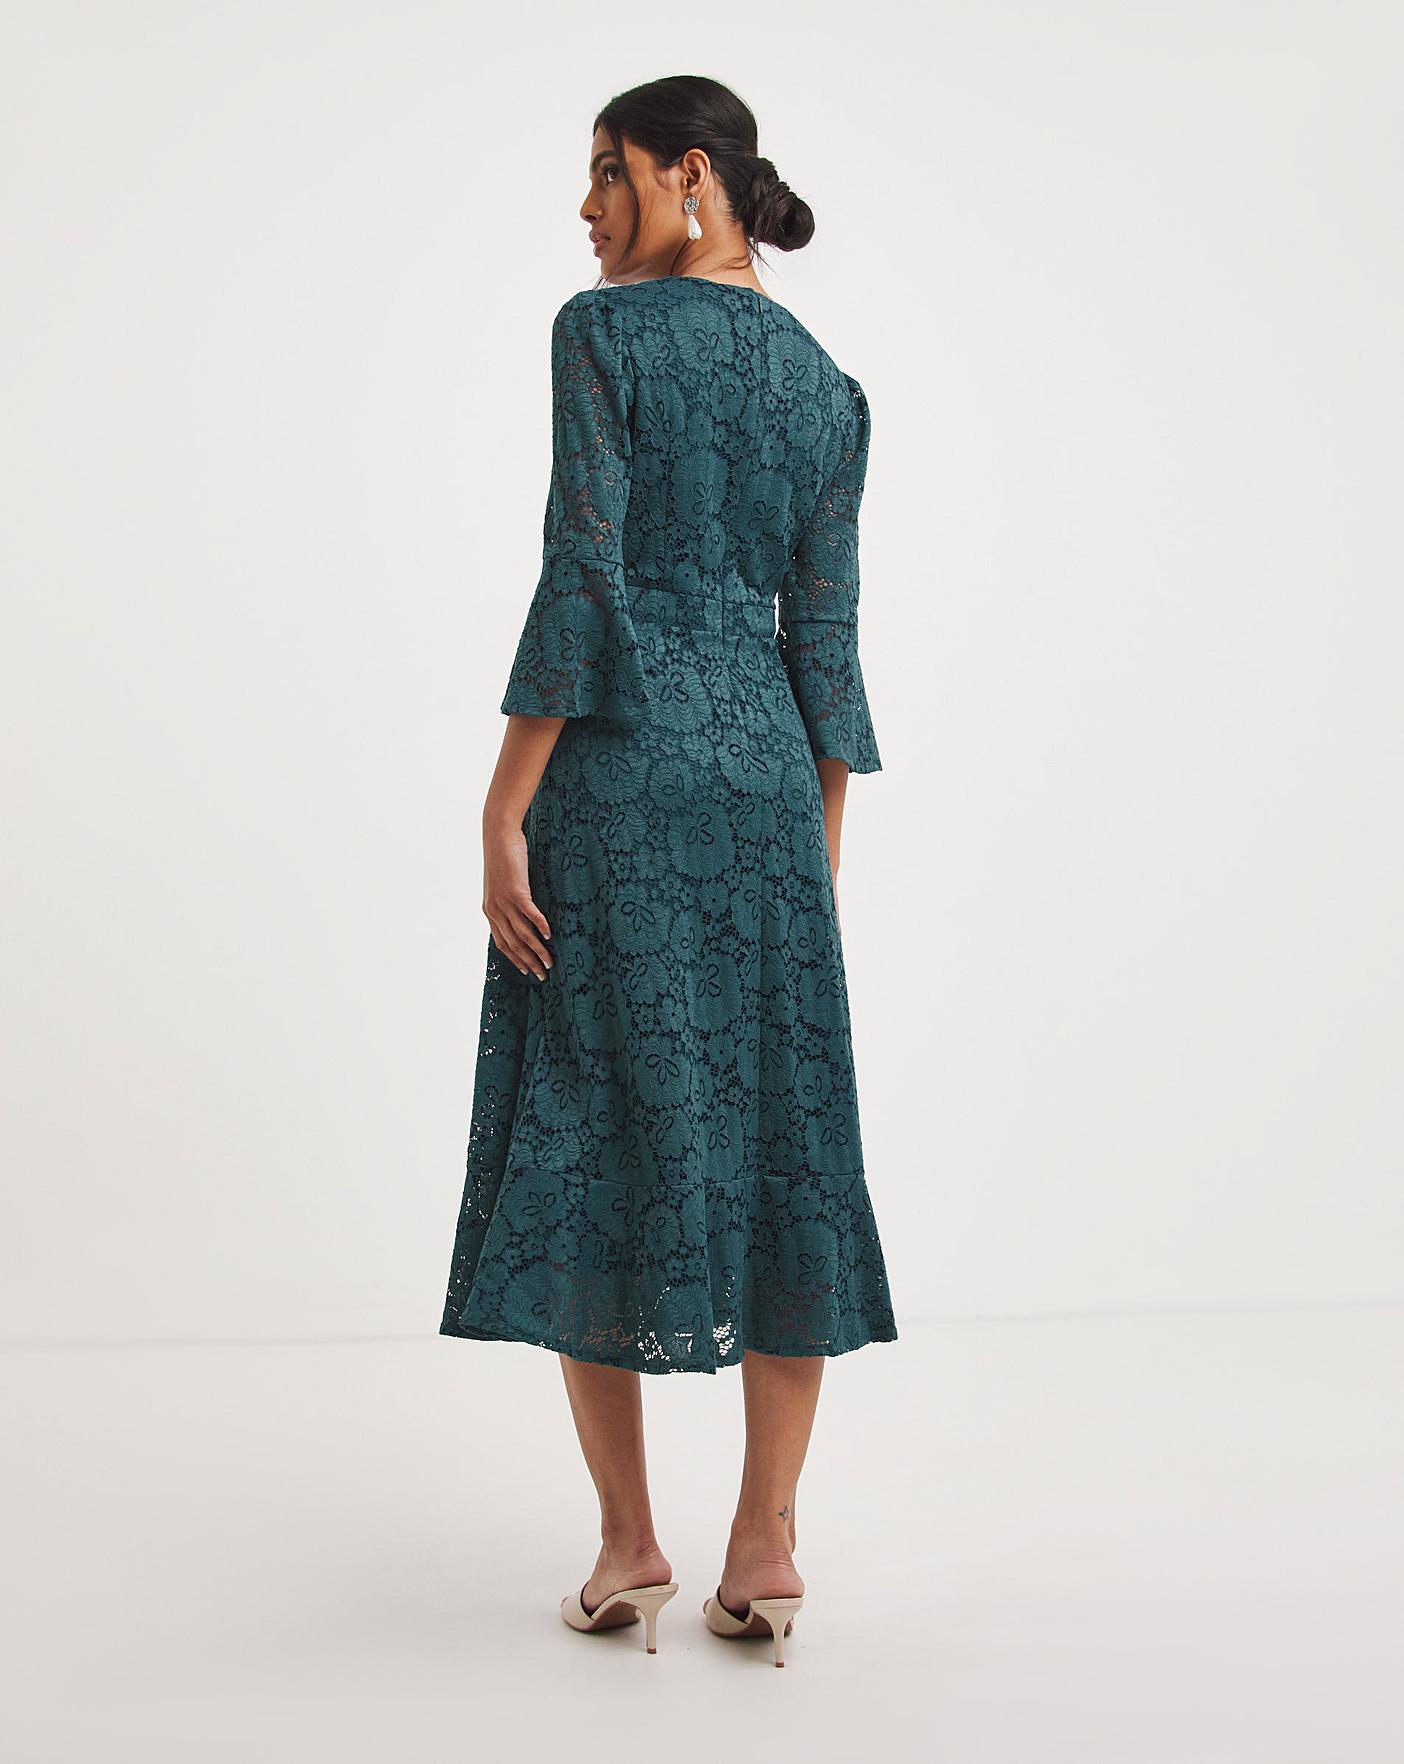 Joanna Hope Stretch Lace Midi Dress | Oxendales